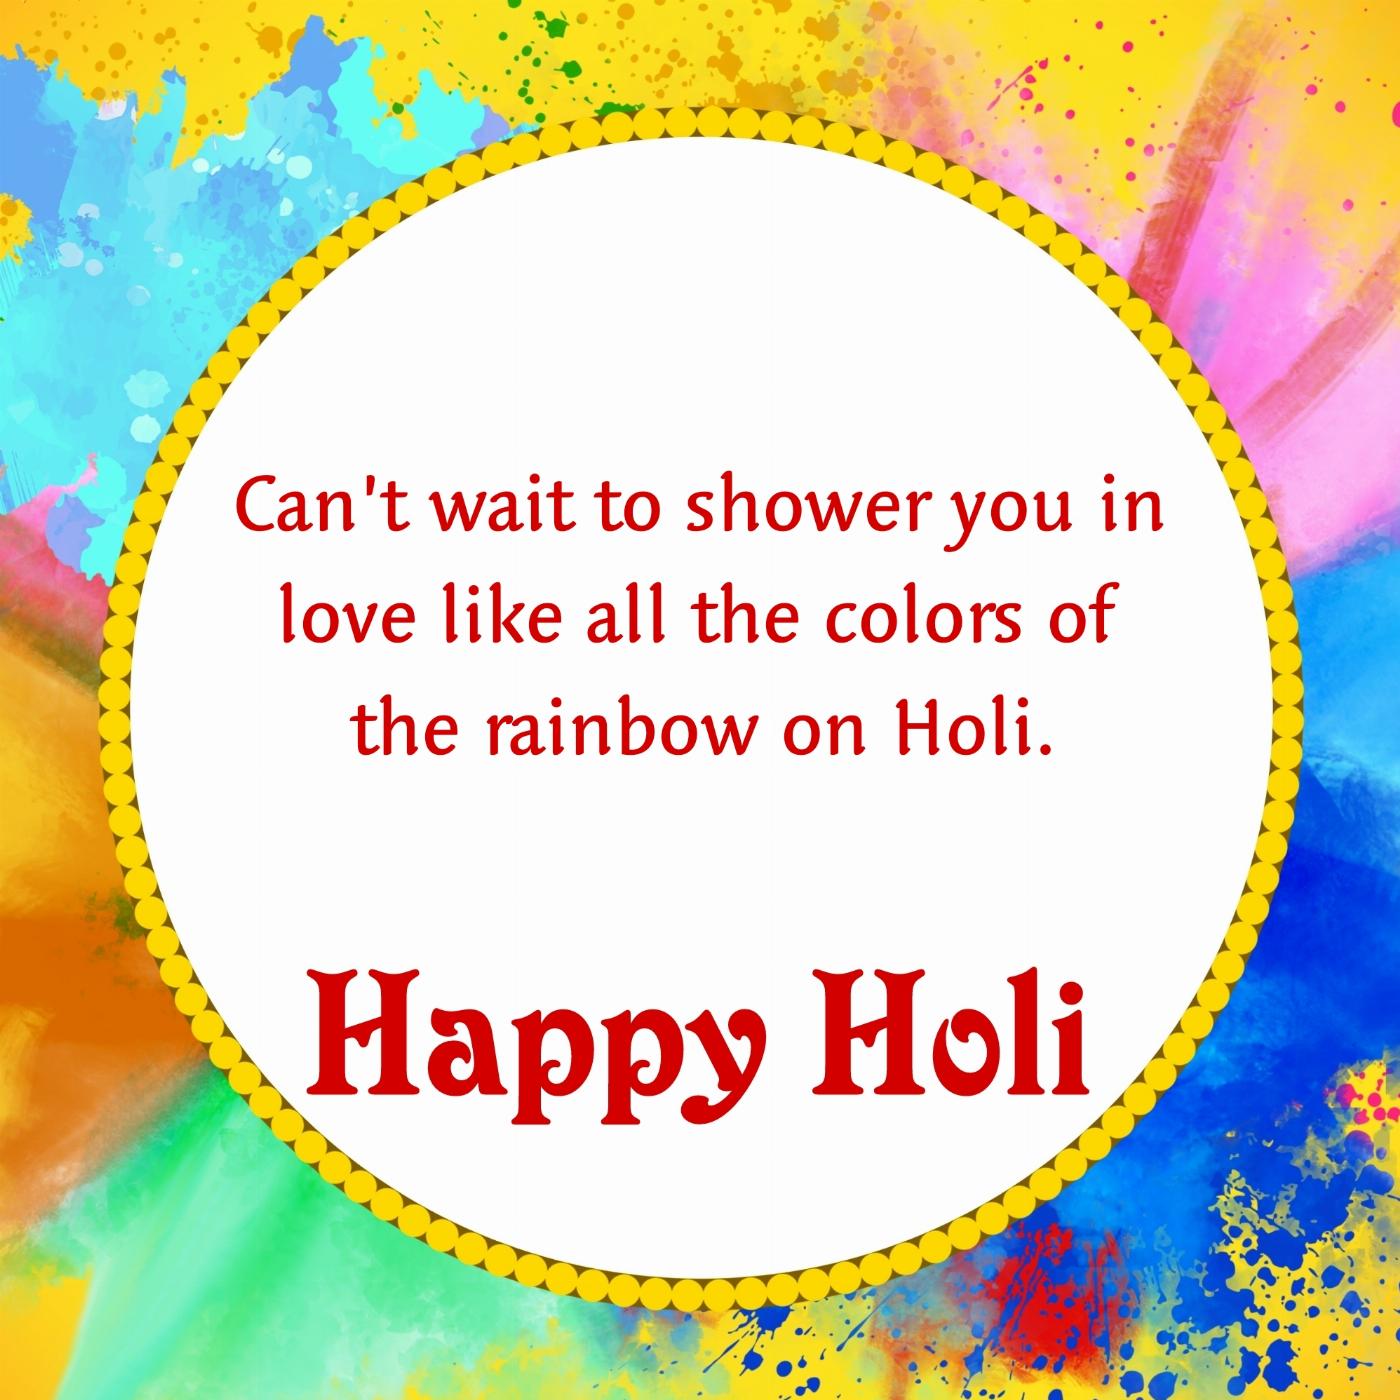 Cant wait to shower you in love like all the colors of the rainbow on Holi